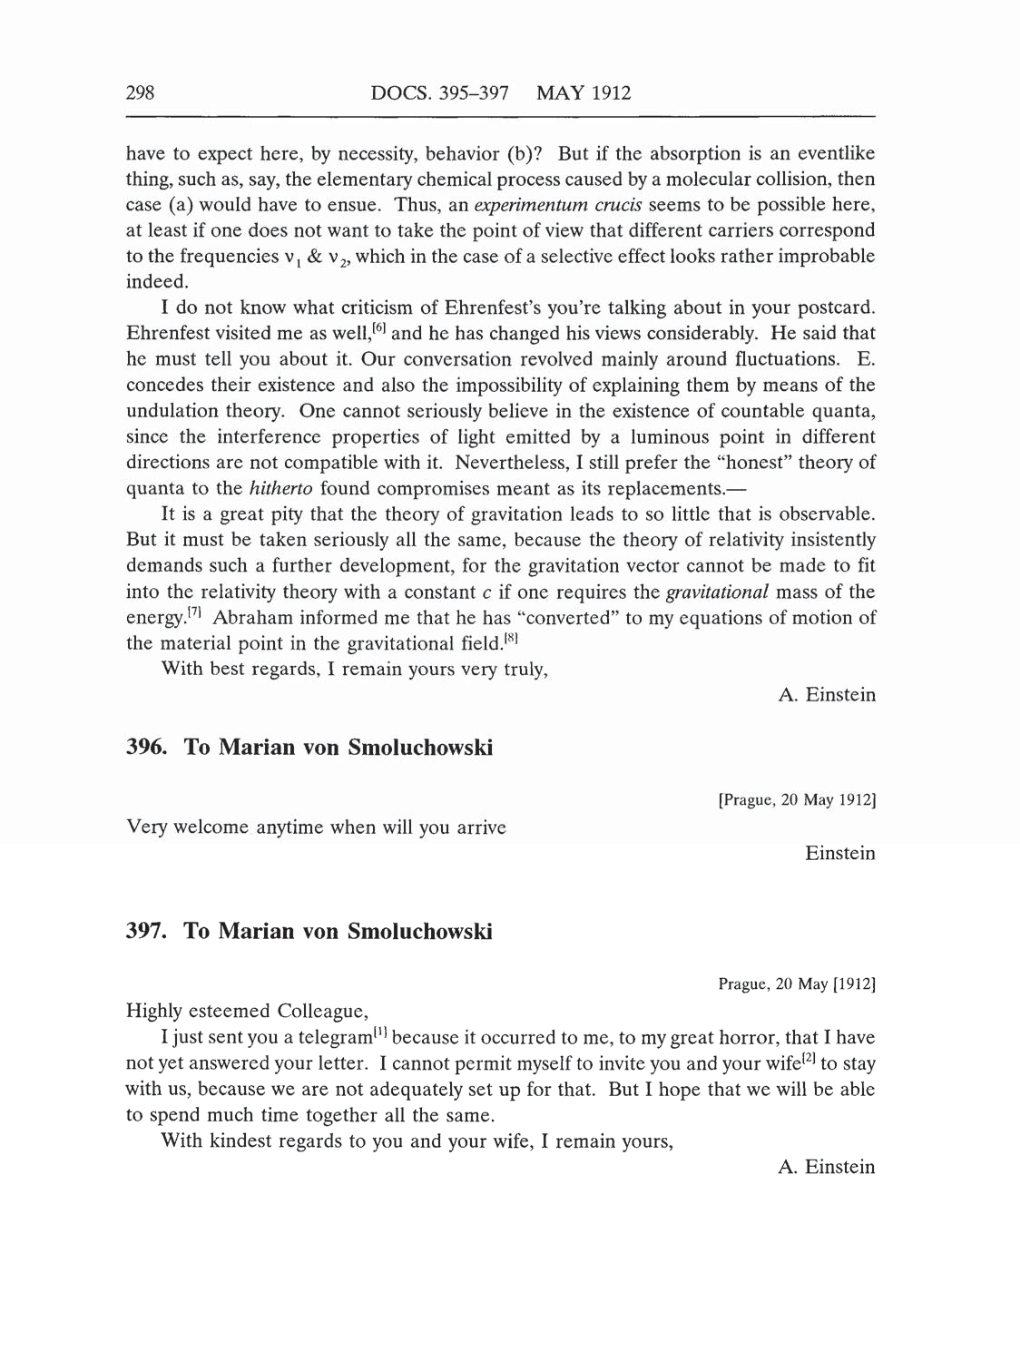 Volume 5: The Swiss Years: Correspondence, 1902-1914 (English translation supplement) page 298